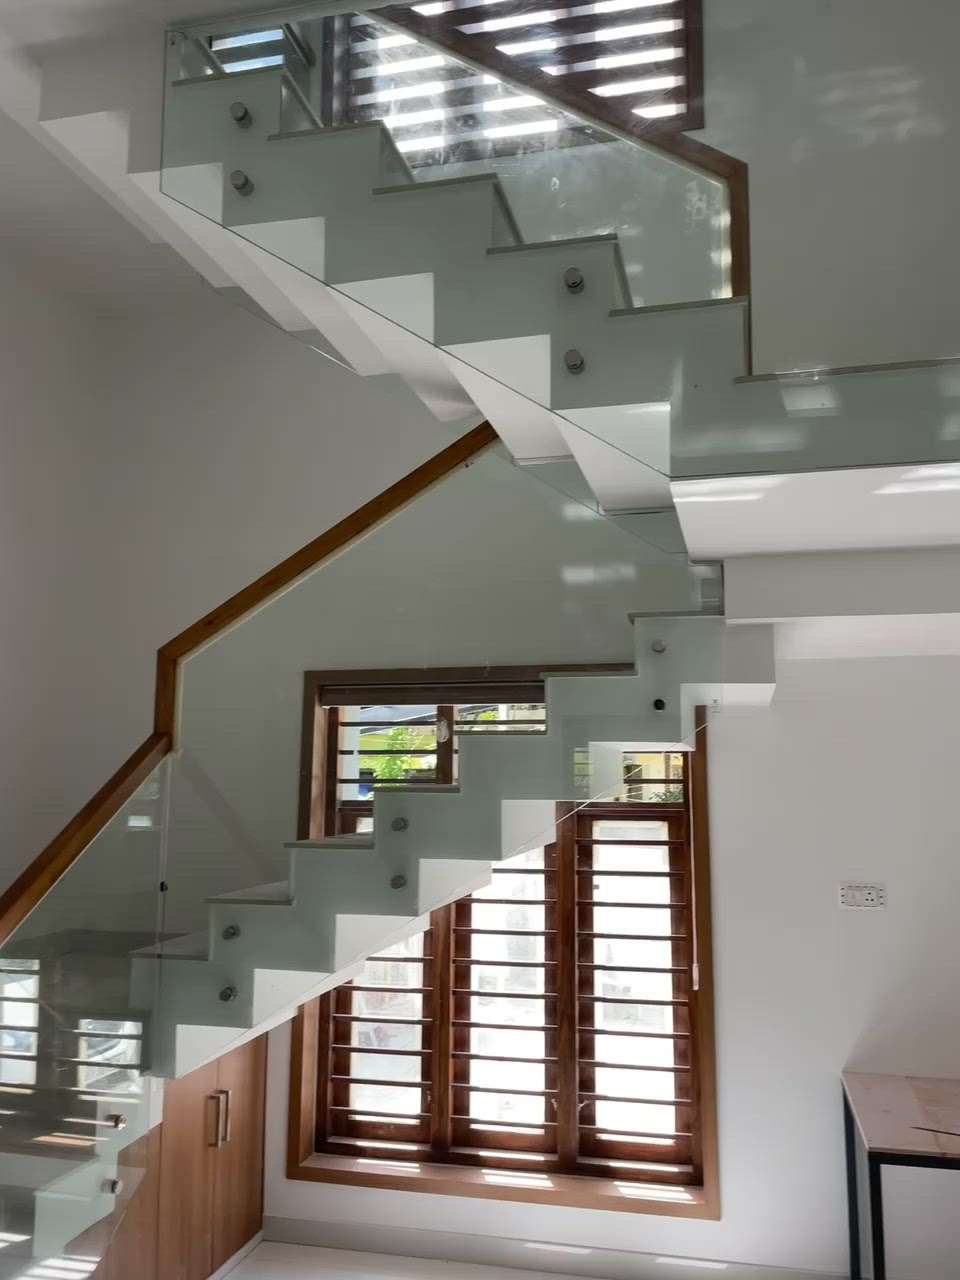 #Glass Stair